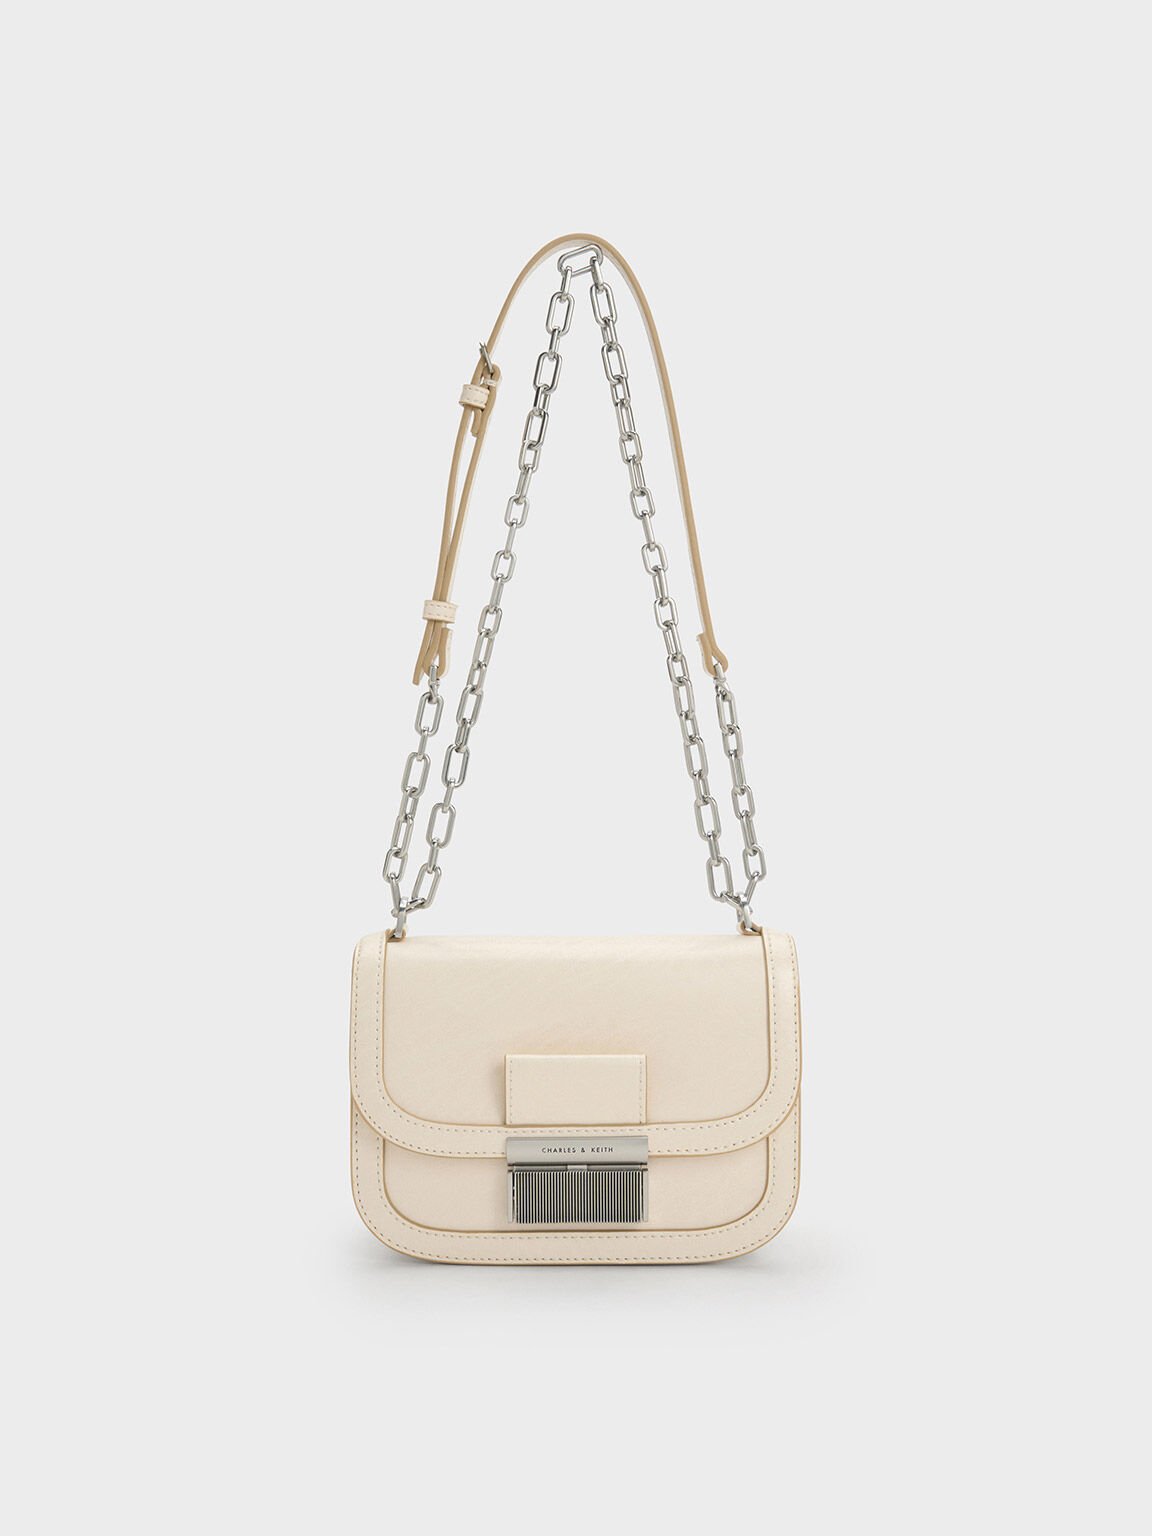 STRUCTURED CROSSBODY BAG - Pink